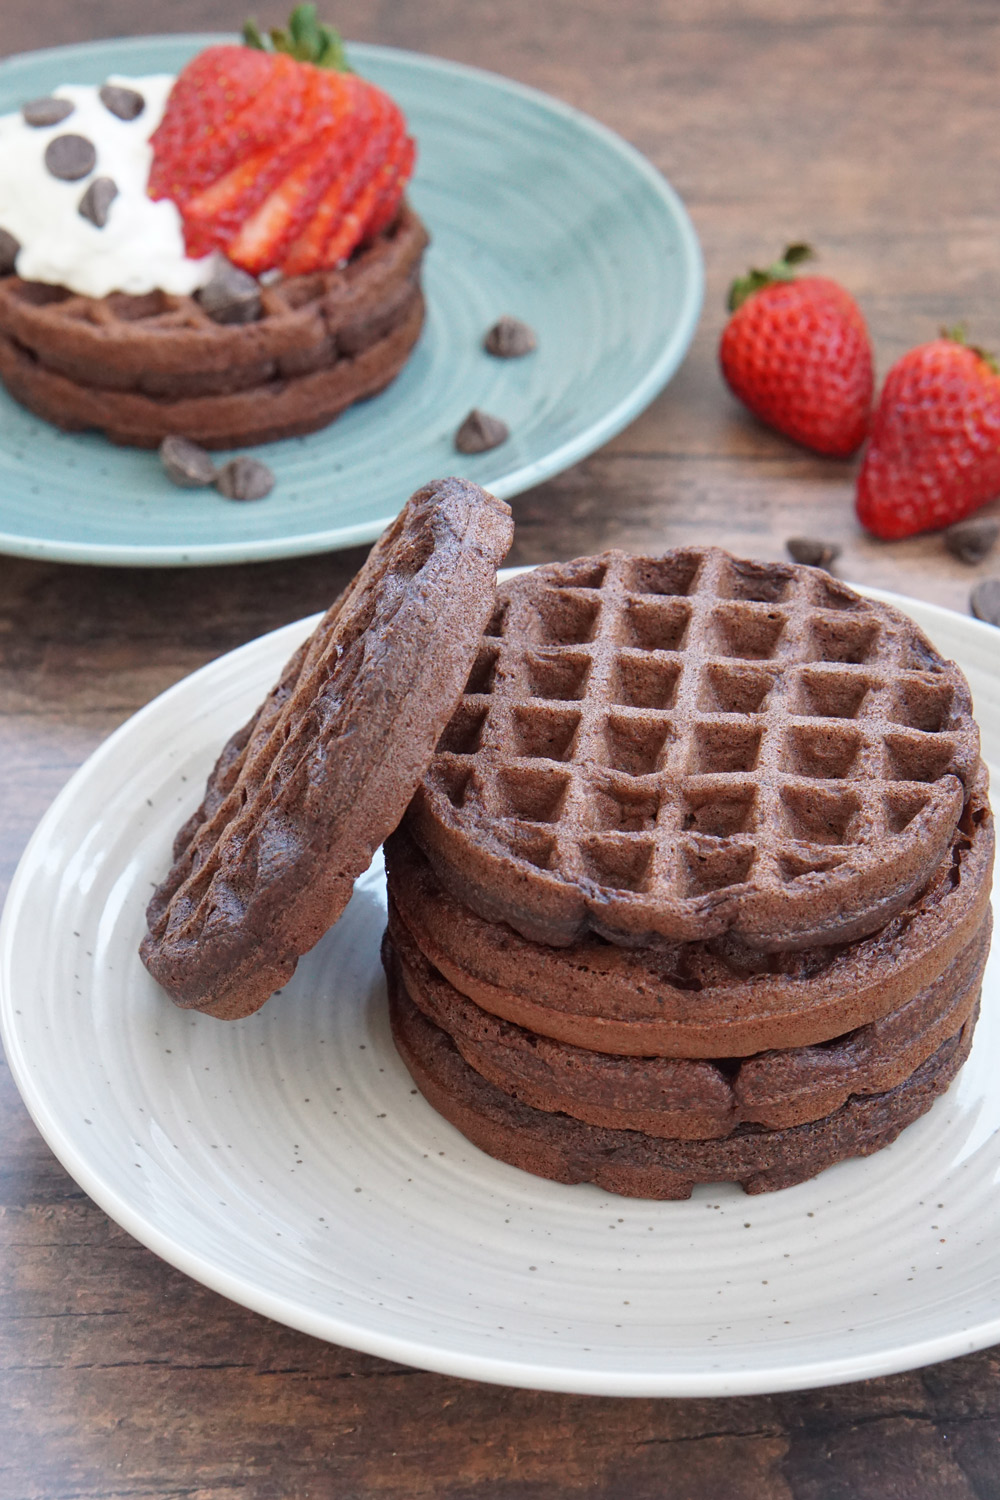 The Best Chaffle Recipe (5 Flavors, Not Eggy!) - Wholesome Yum